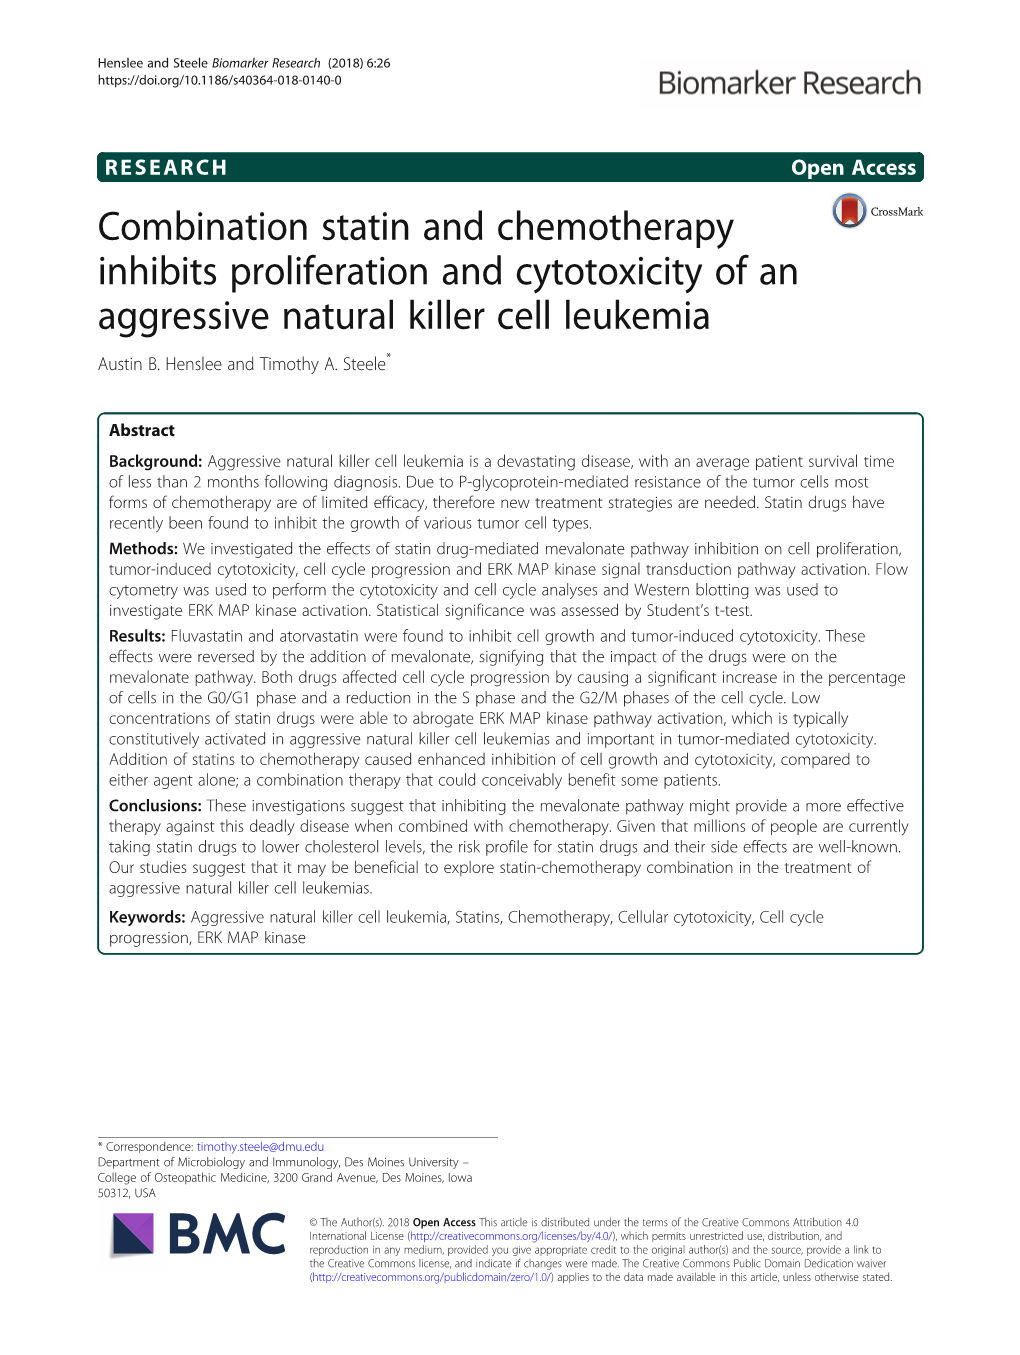 Combination Statin and Chemotherapy Inhibits Proliferation and Cytotoxicity of an Aggressive Natural Killer Cell Leukemia Austin B